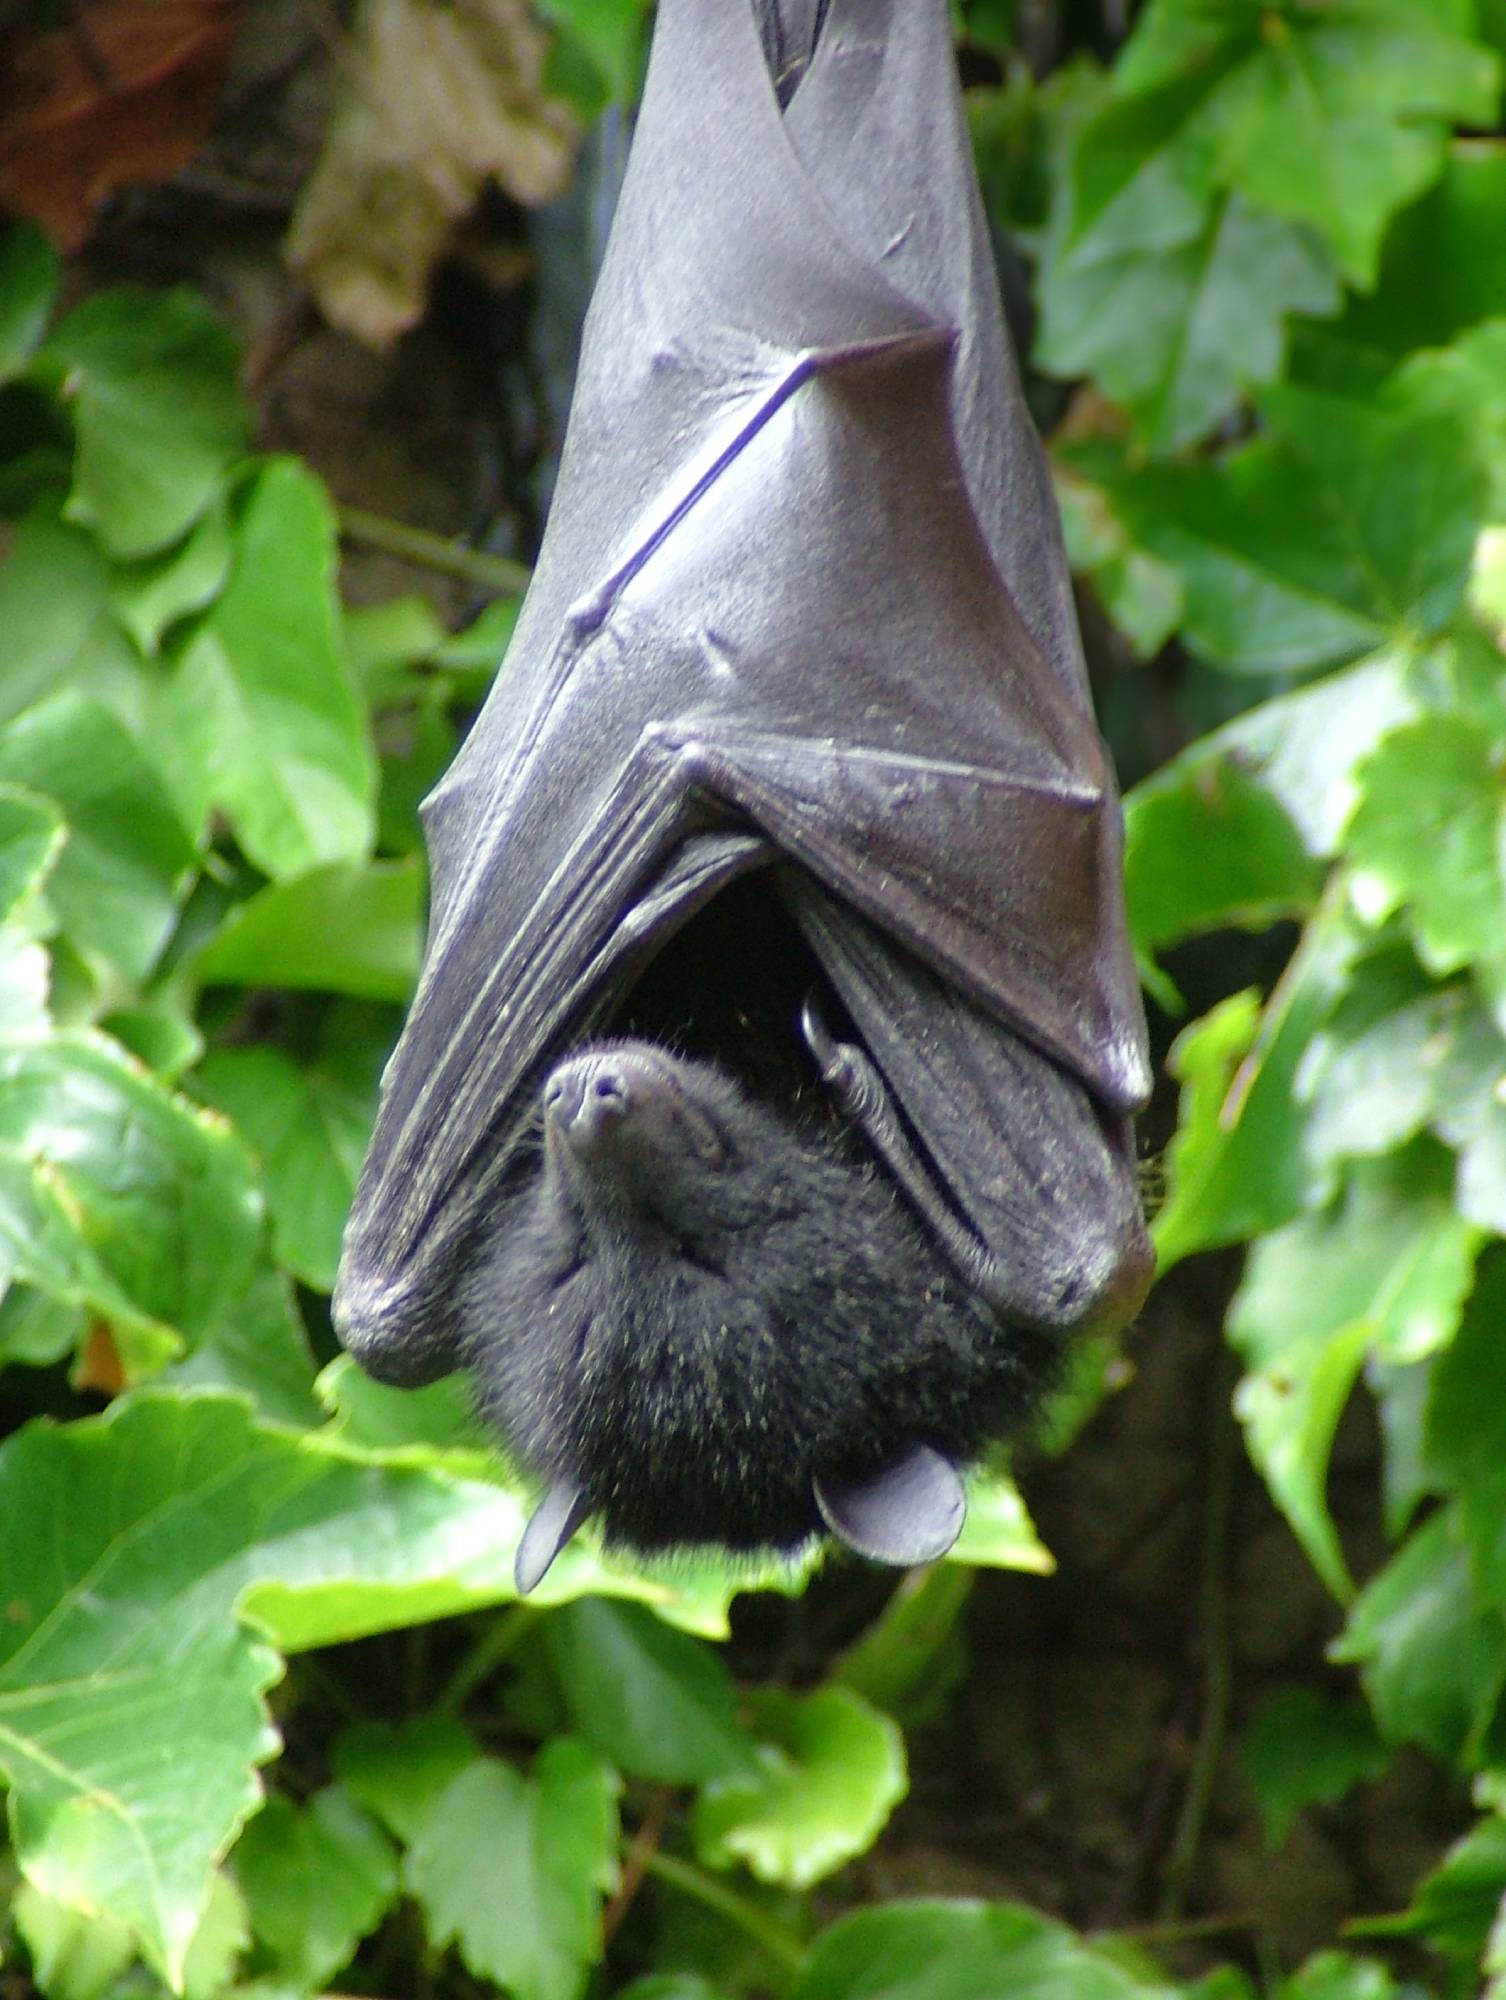 Livingstone's fruit bat (Pteropus livingstonii), also called the Comoro flying fox. Image credit: Ben Charles, CC by 2.0 Deed